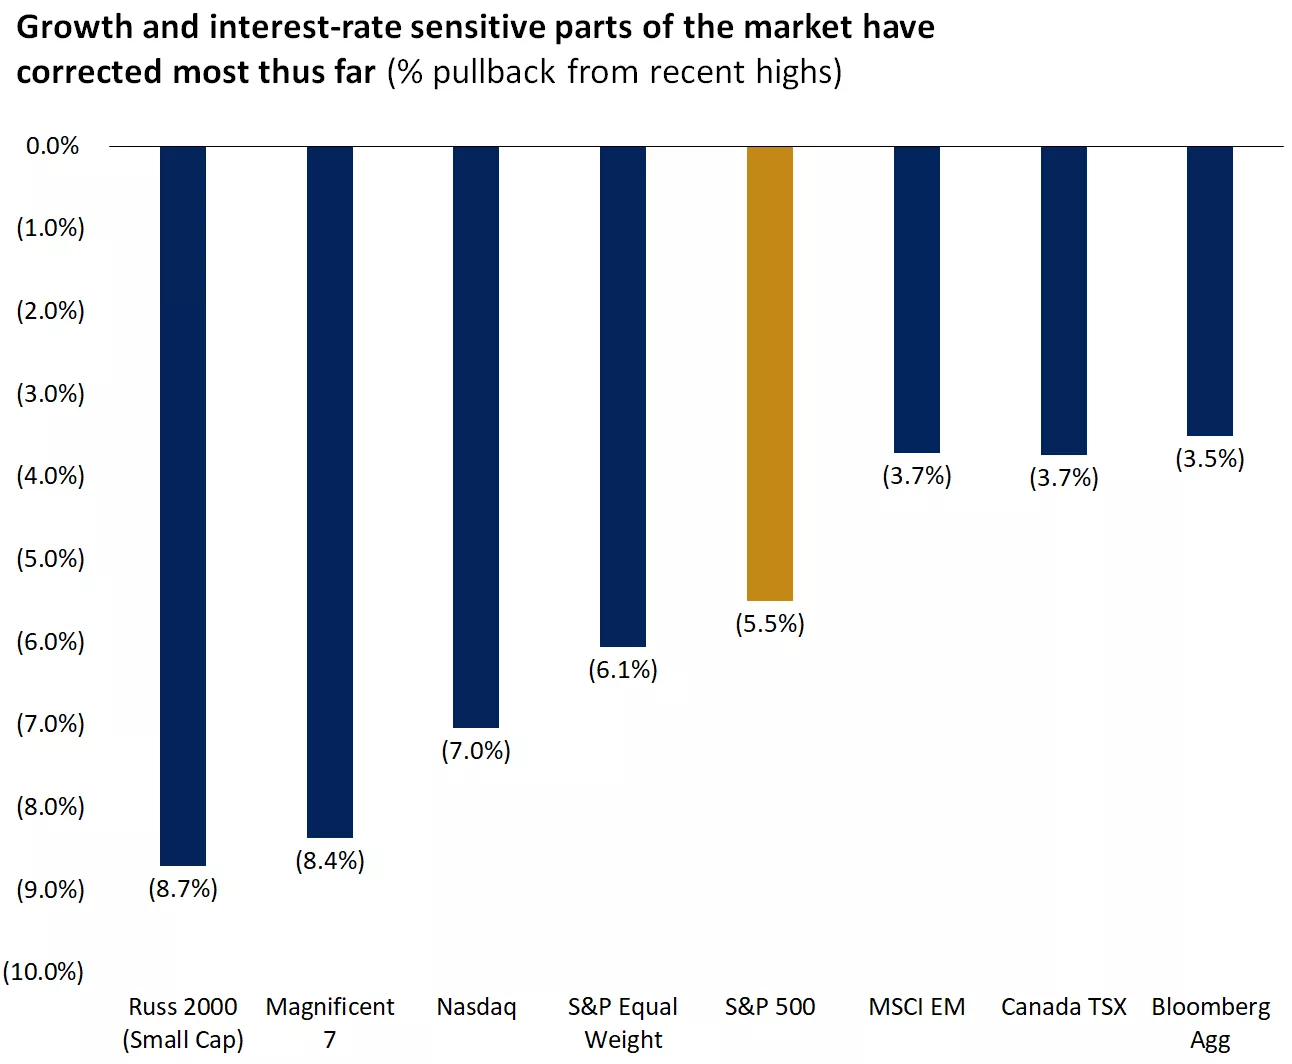  Chart showing growth and interest-rate sensitive parts of the market
